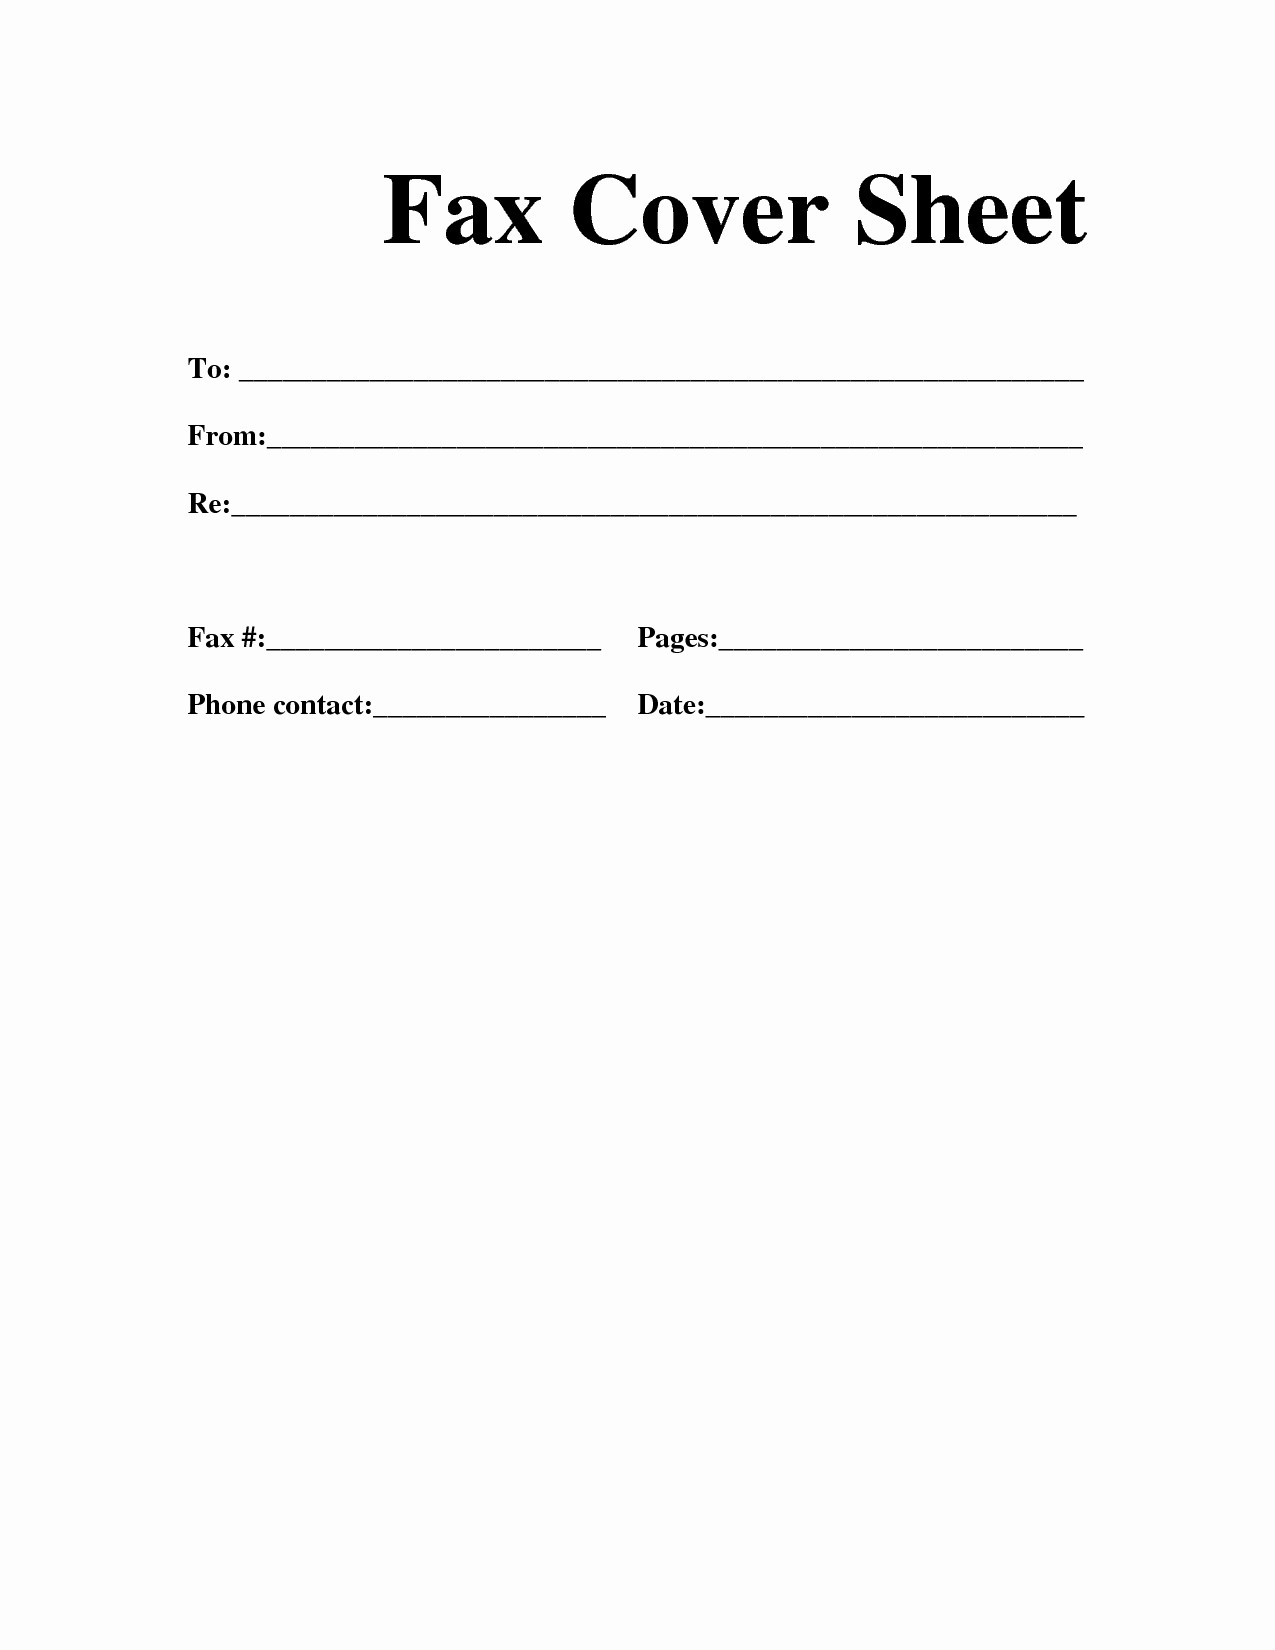 Fax Cover Sheets Microsoft Word Best Of Fax Cover Sheet for Word Portablegasgrillweber